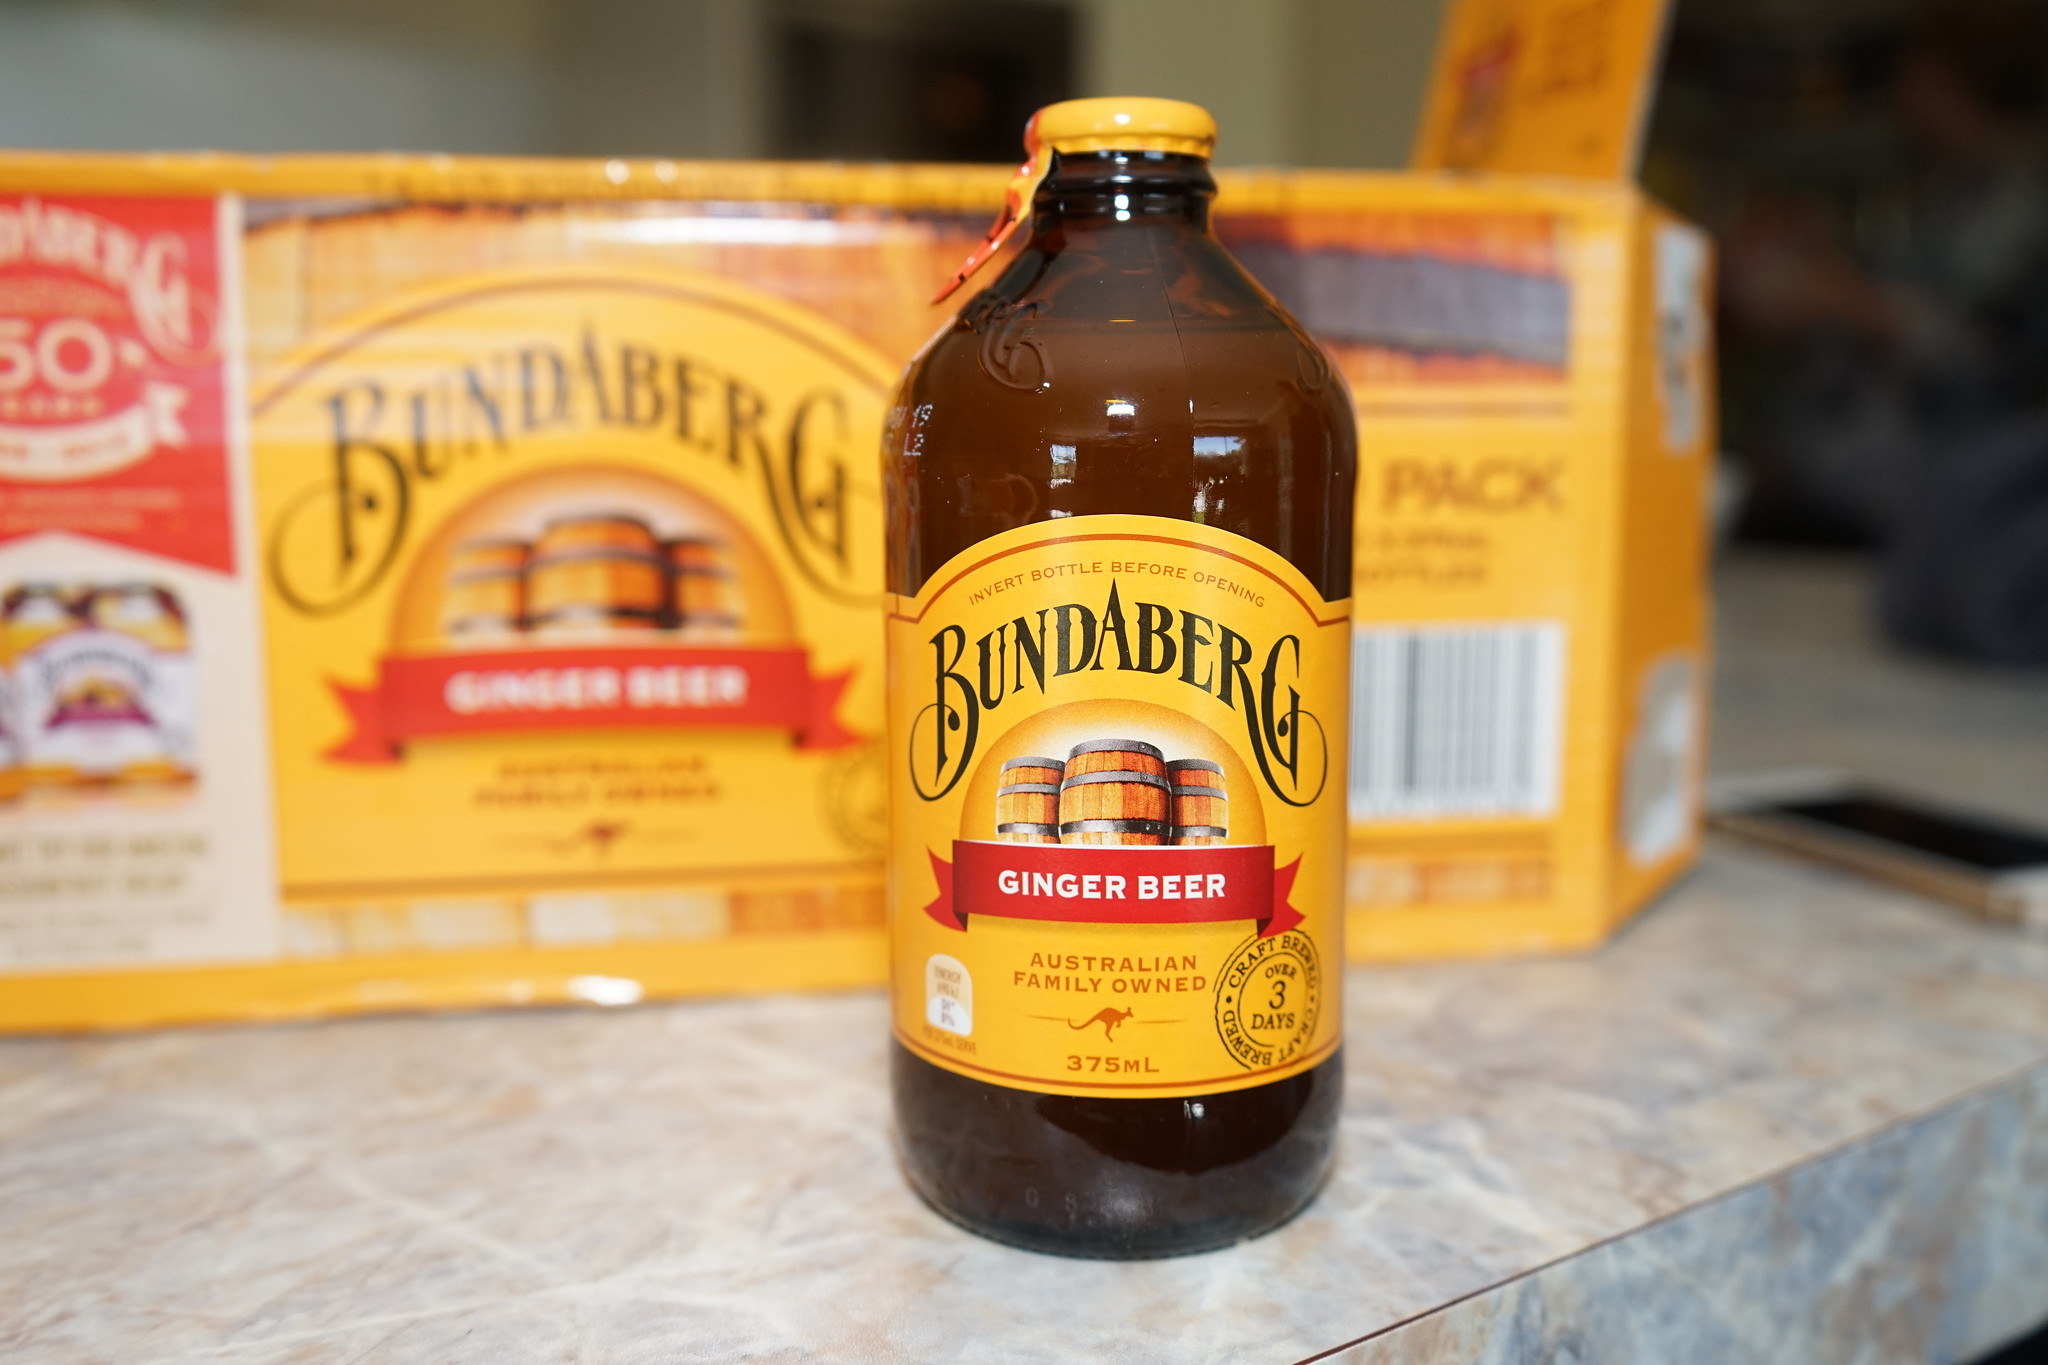 A bottle of Bundaberg ginger beer, with a case of it in the background